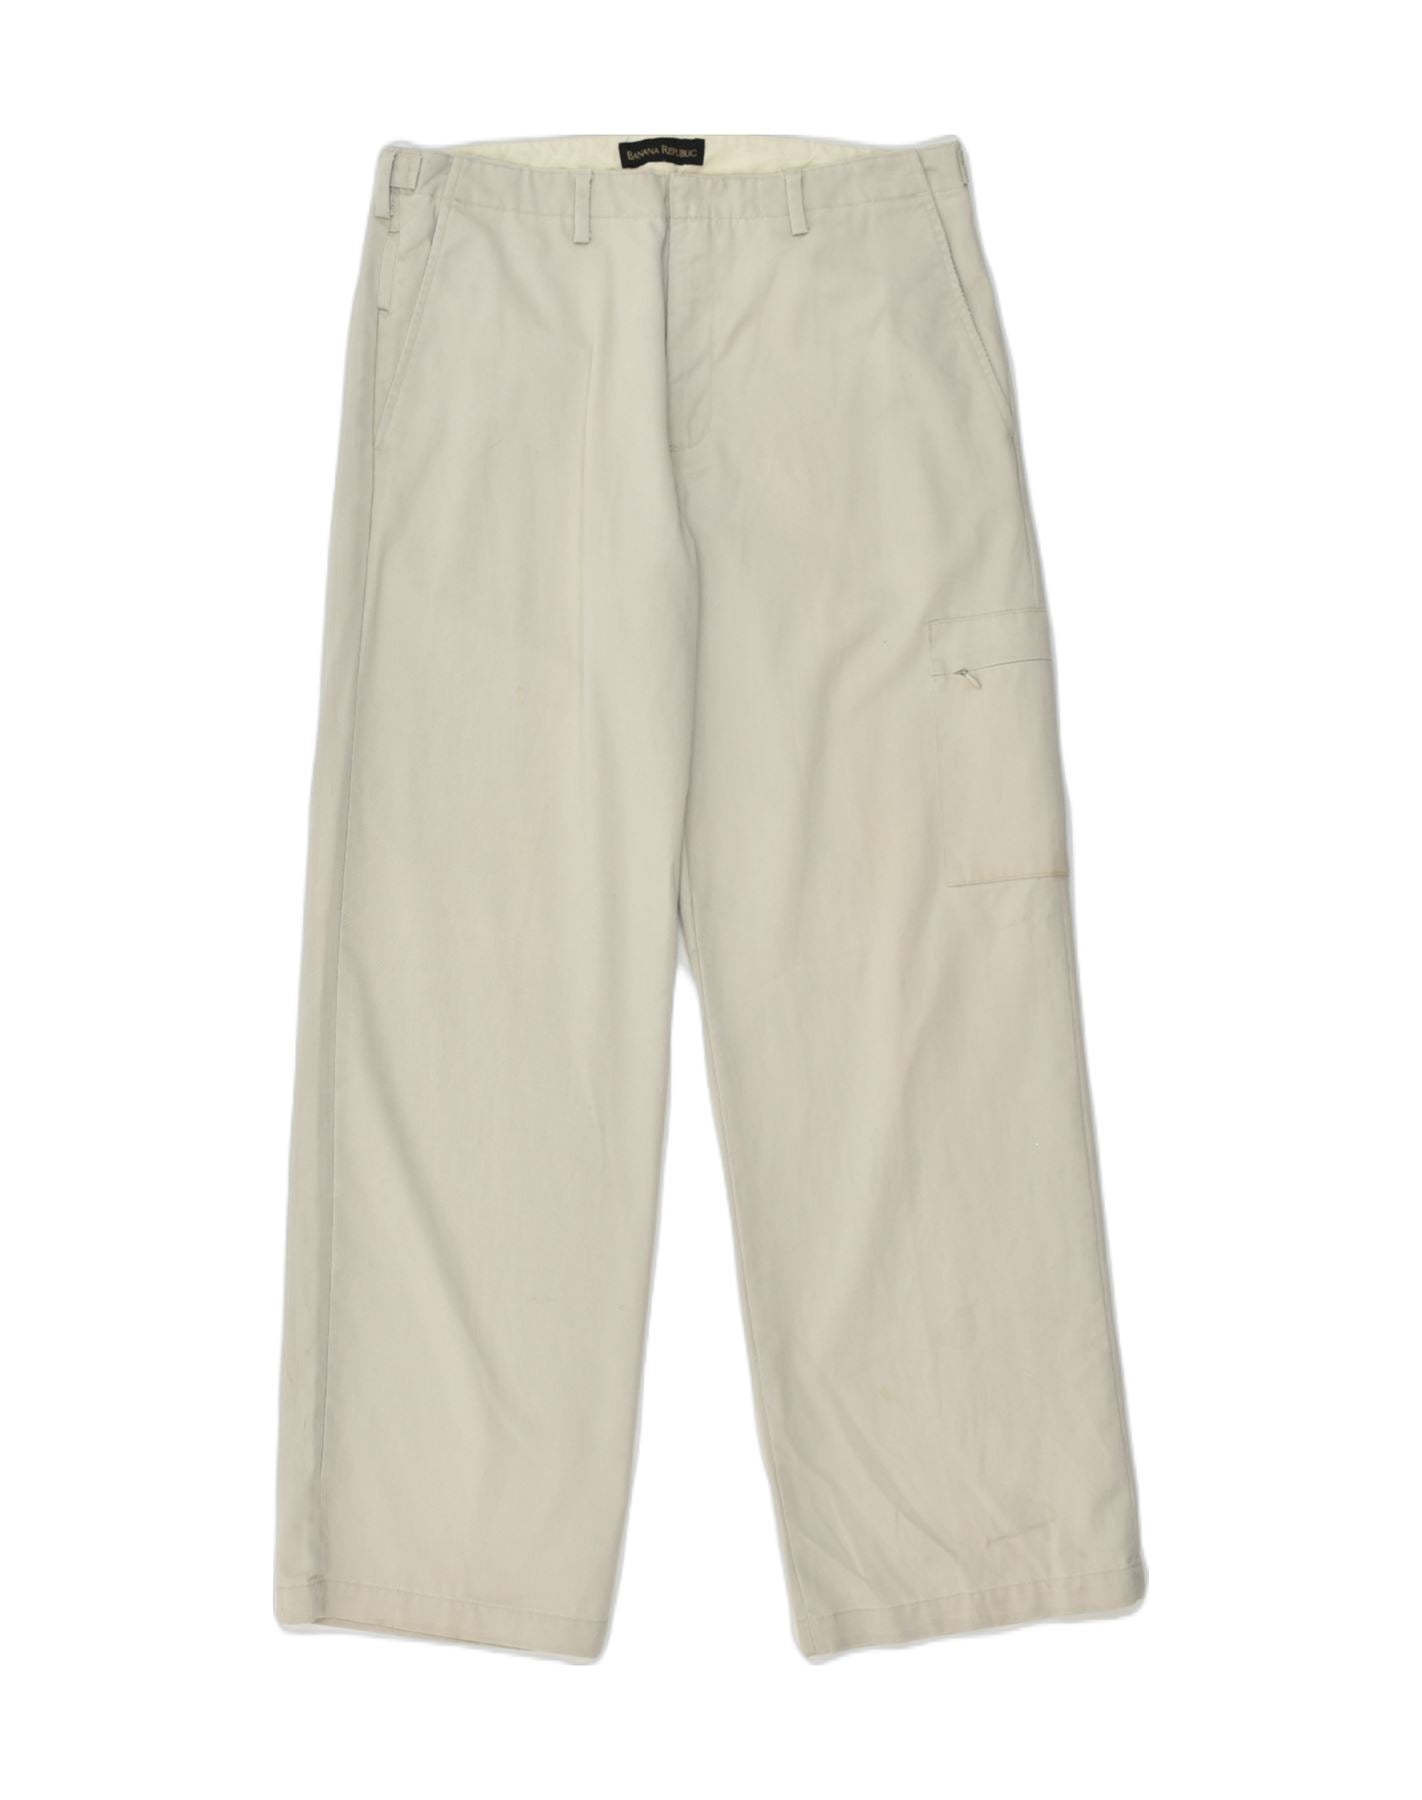 BANANA REPUBLIC Mens Straight Chino Trousers W33 L32 Beige Cotton, Vintage  & Second-Hand Clothing Online